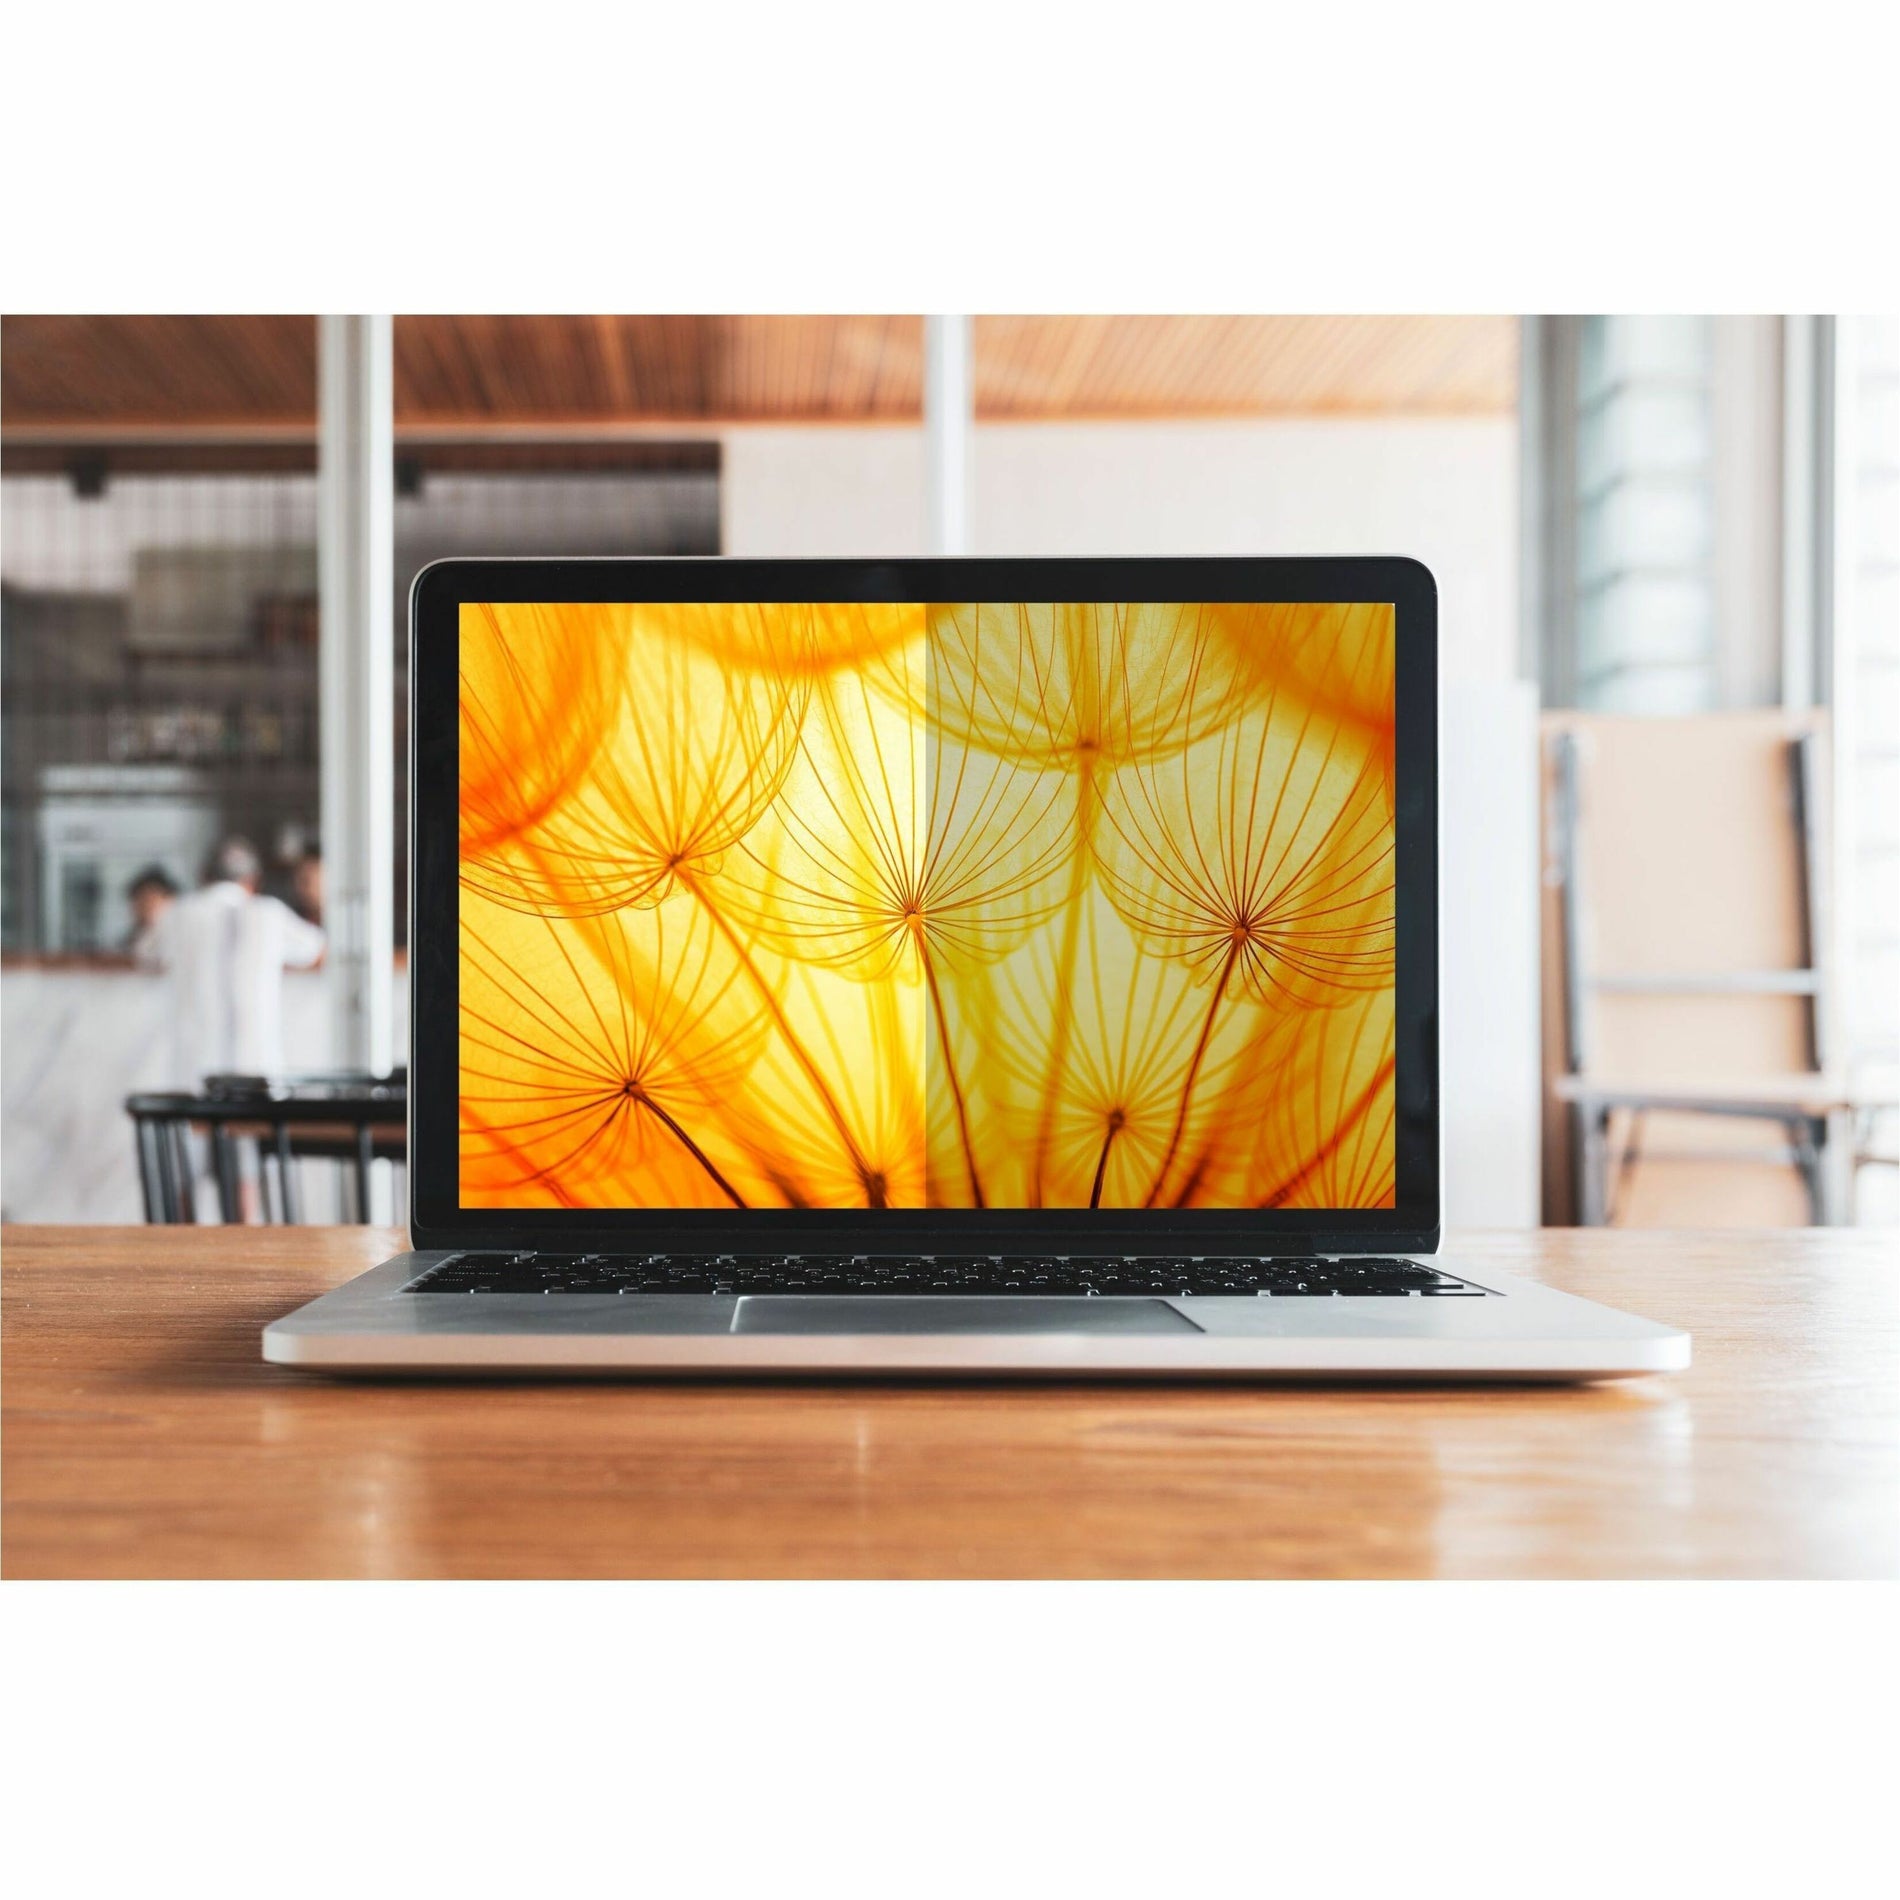 3M BP150C3B Bright Screen Privacy Filter for 15in Laptop, Limited Viewing Angle, Blue Light Reduction